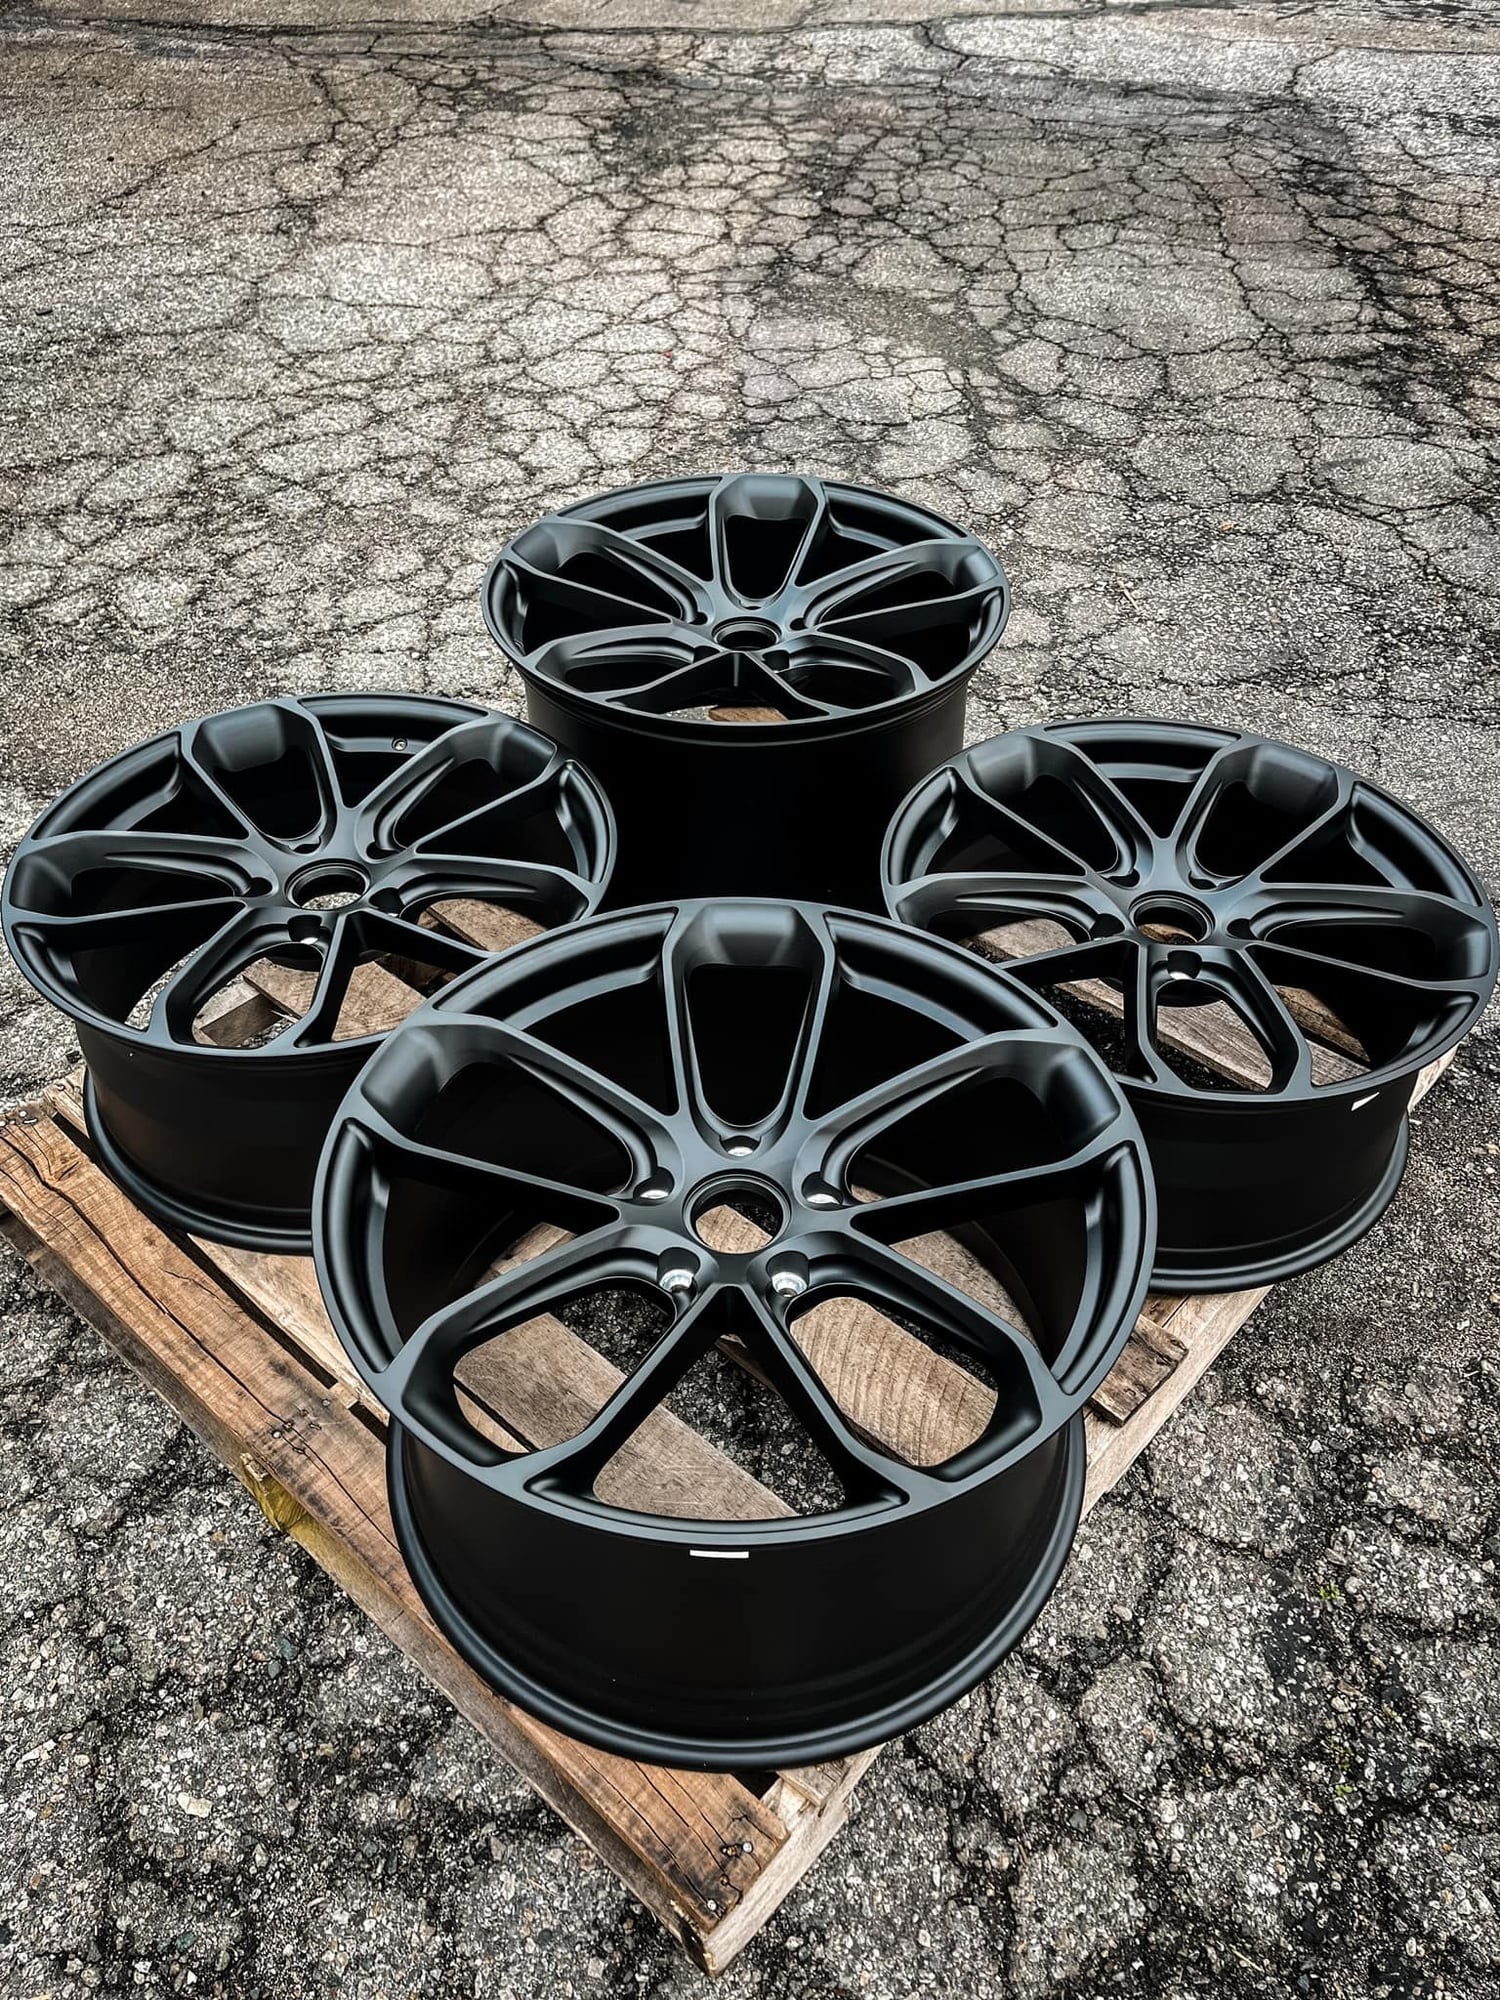 Wheels and Tires/Axles - 1pc Forged Turbo GT style wheels 22" for Cayenne - New - Commerce, CA 90040, United States